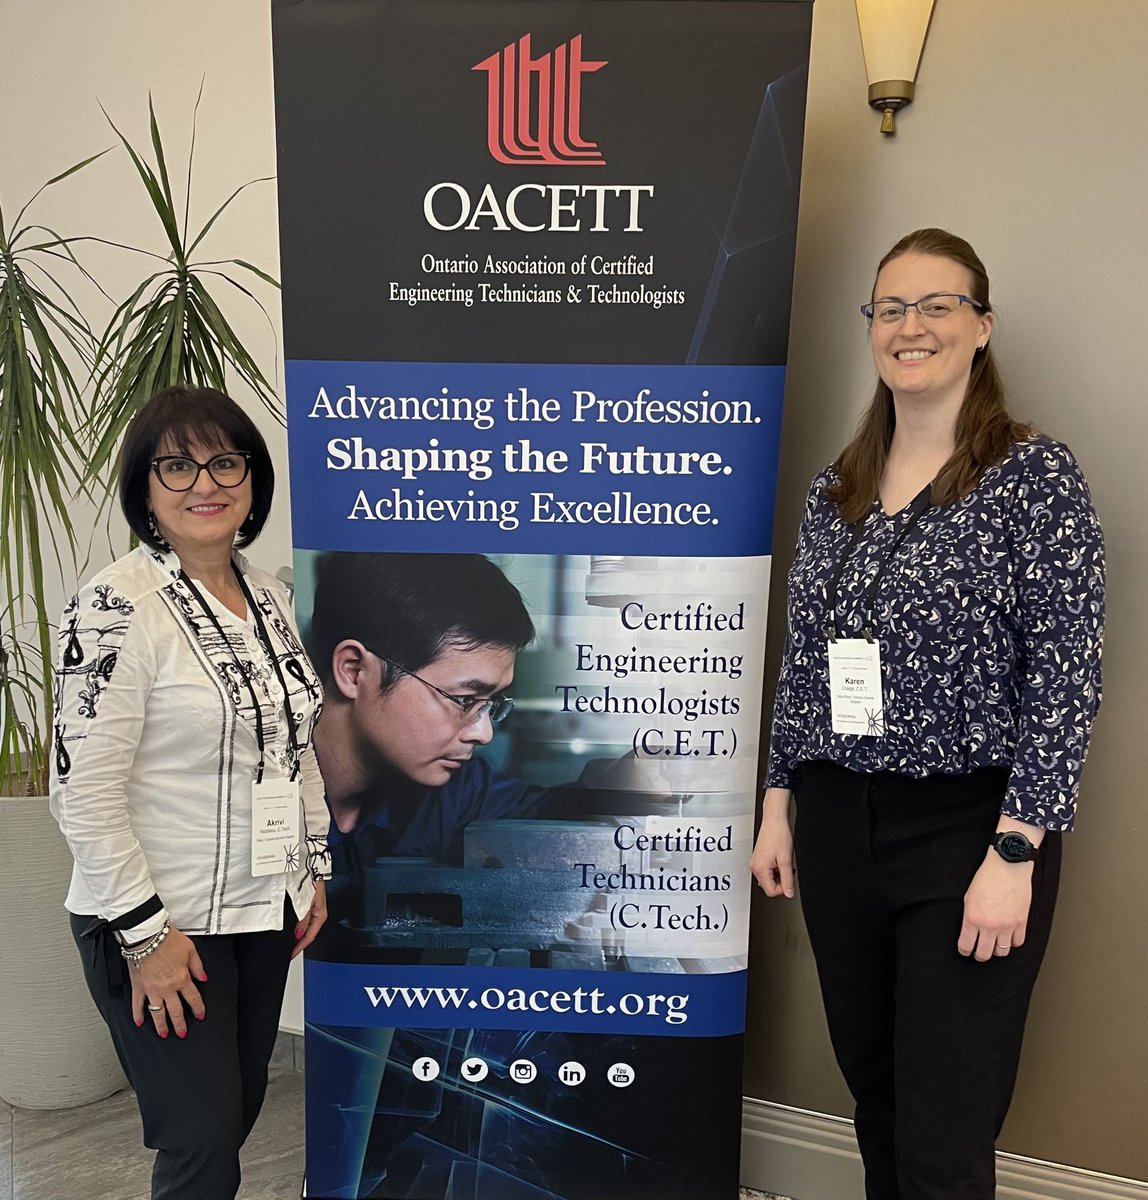 You can find a few of our Toronto Central Chapter members currently attending the OACETT Annual Conference June 1-3 in Niagara Falls… Please reach out on LinkedIn or Twitter to connect. #OACETT_TC #networking #technologyleadership